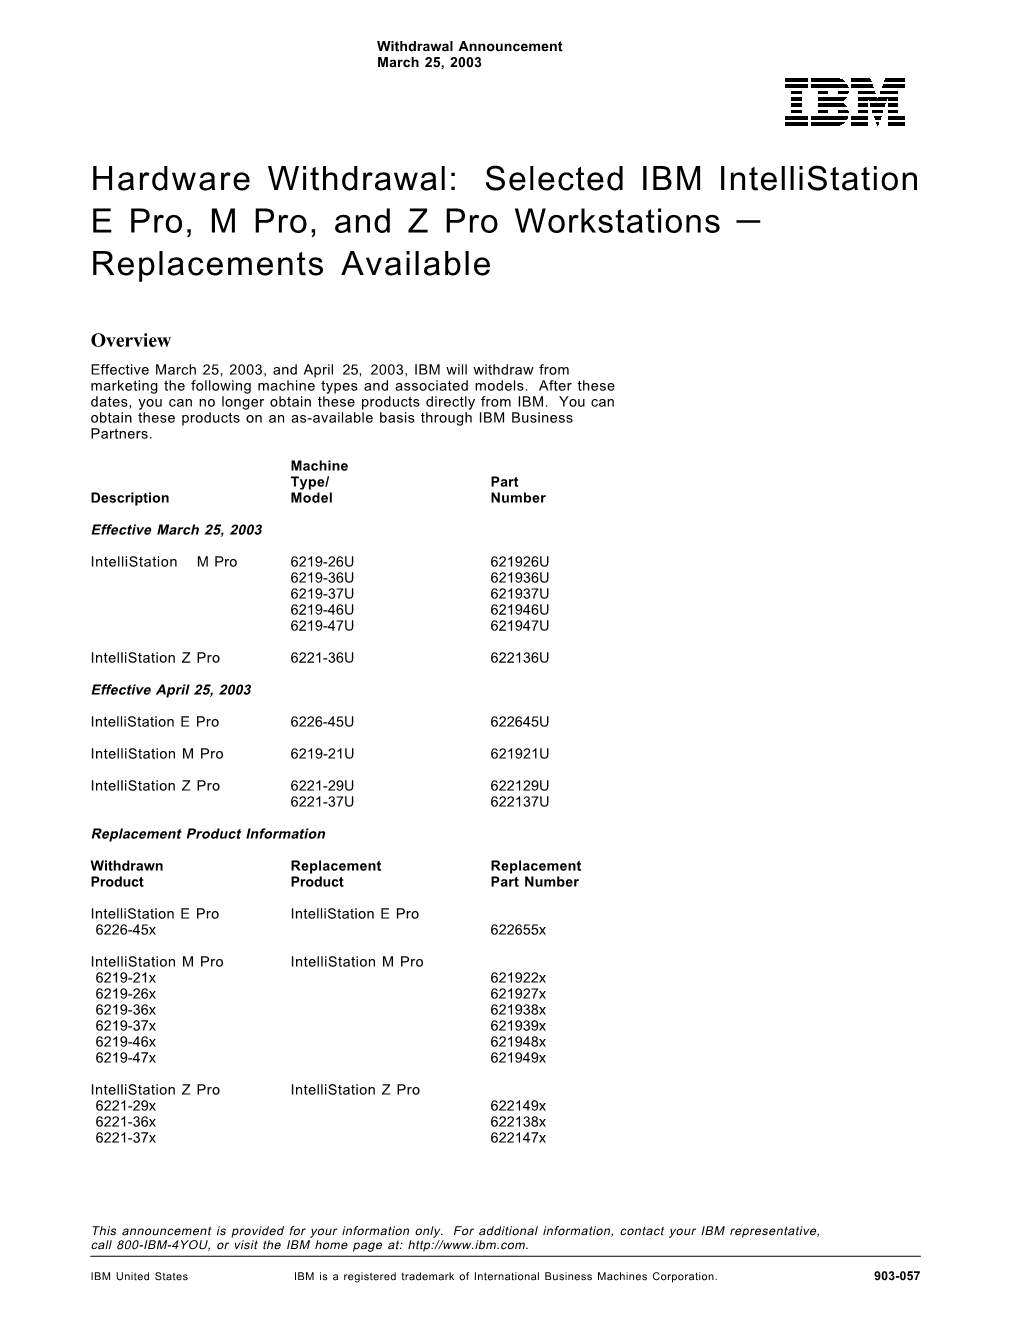 Hardware Withdrawal: Selected IBM Intellistation E Pro, M Pro, and Z Pro Workstations — Replacements Available